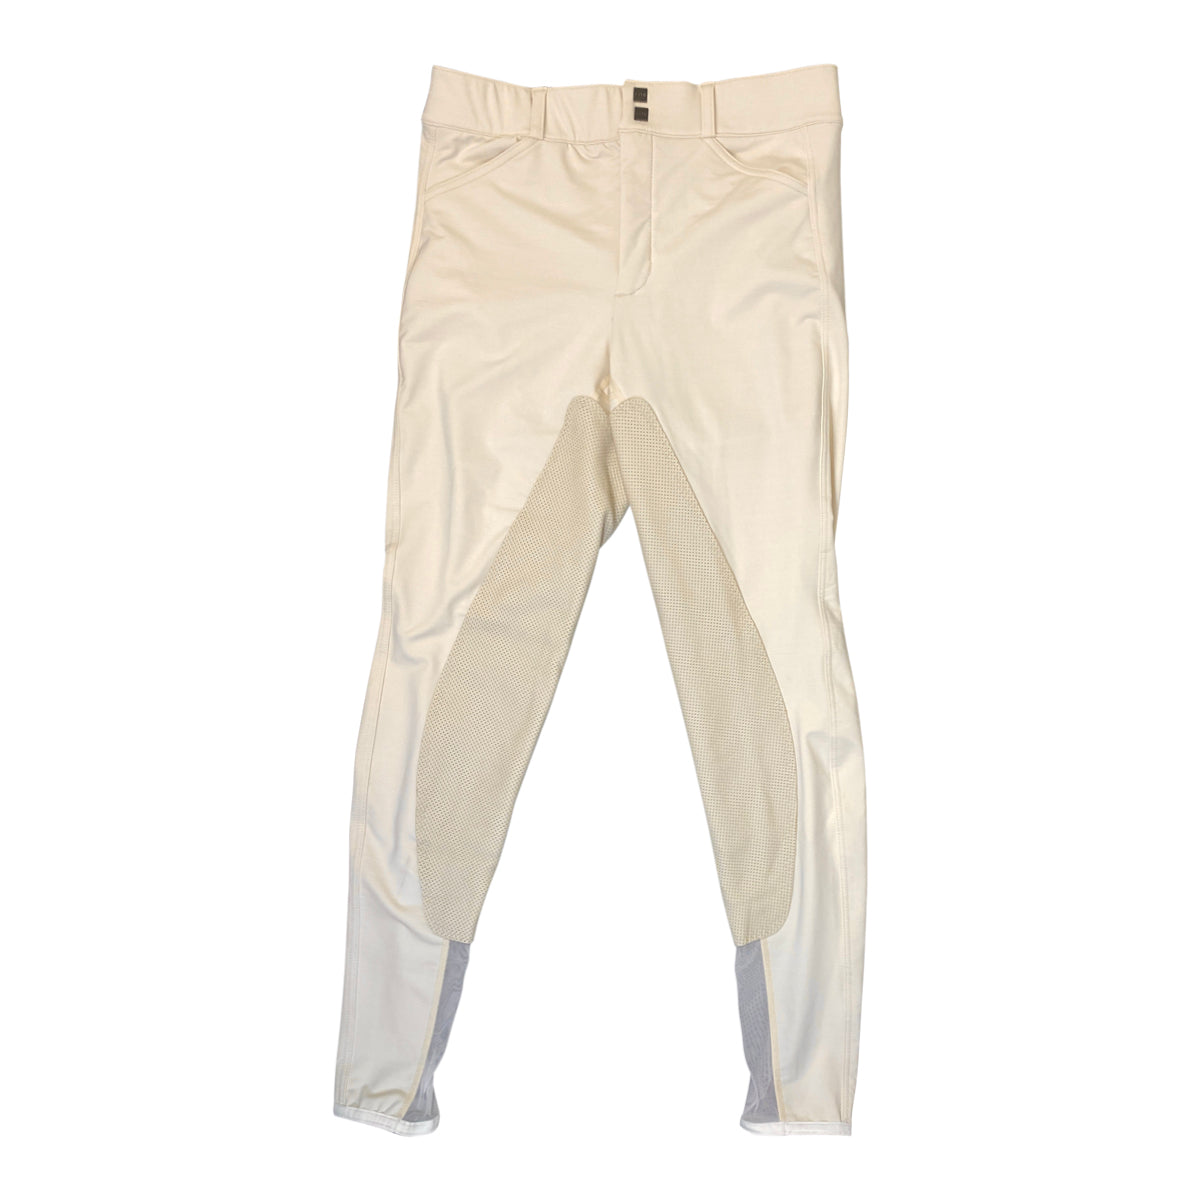 FITS PerforMAX All Season Breeches in Champagne